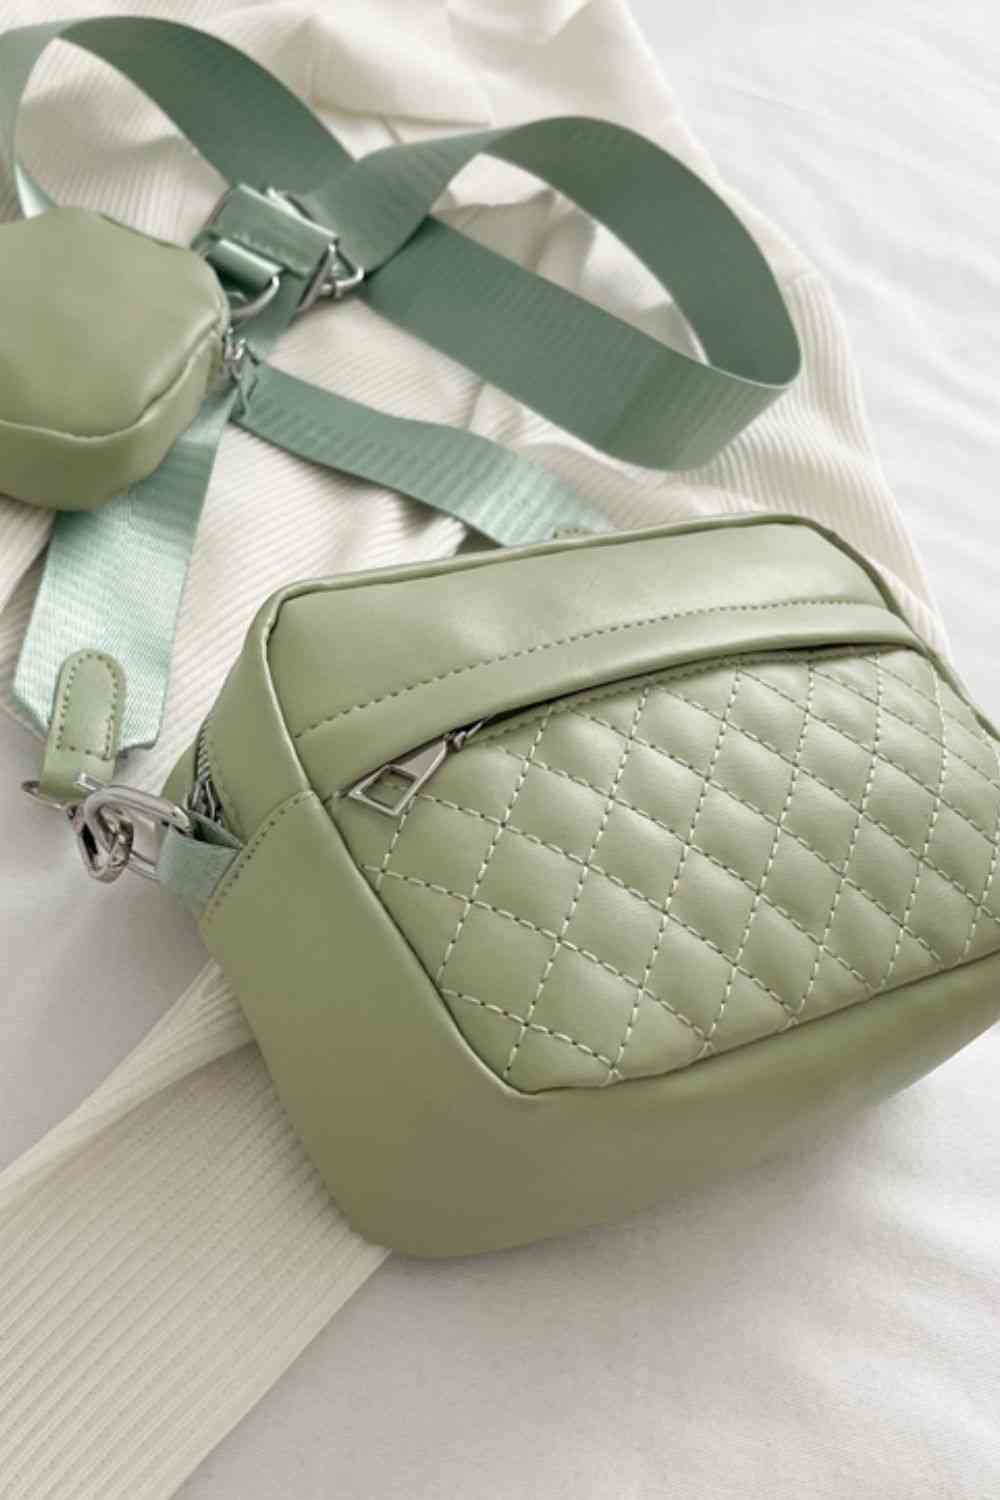 Adored Quilted Stitching Vegan Leather Crossbody Bag with Small Purse